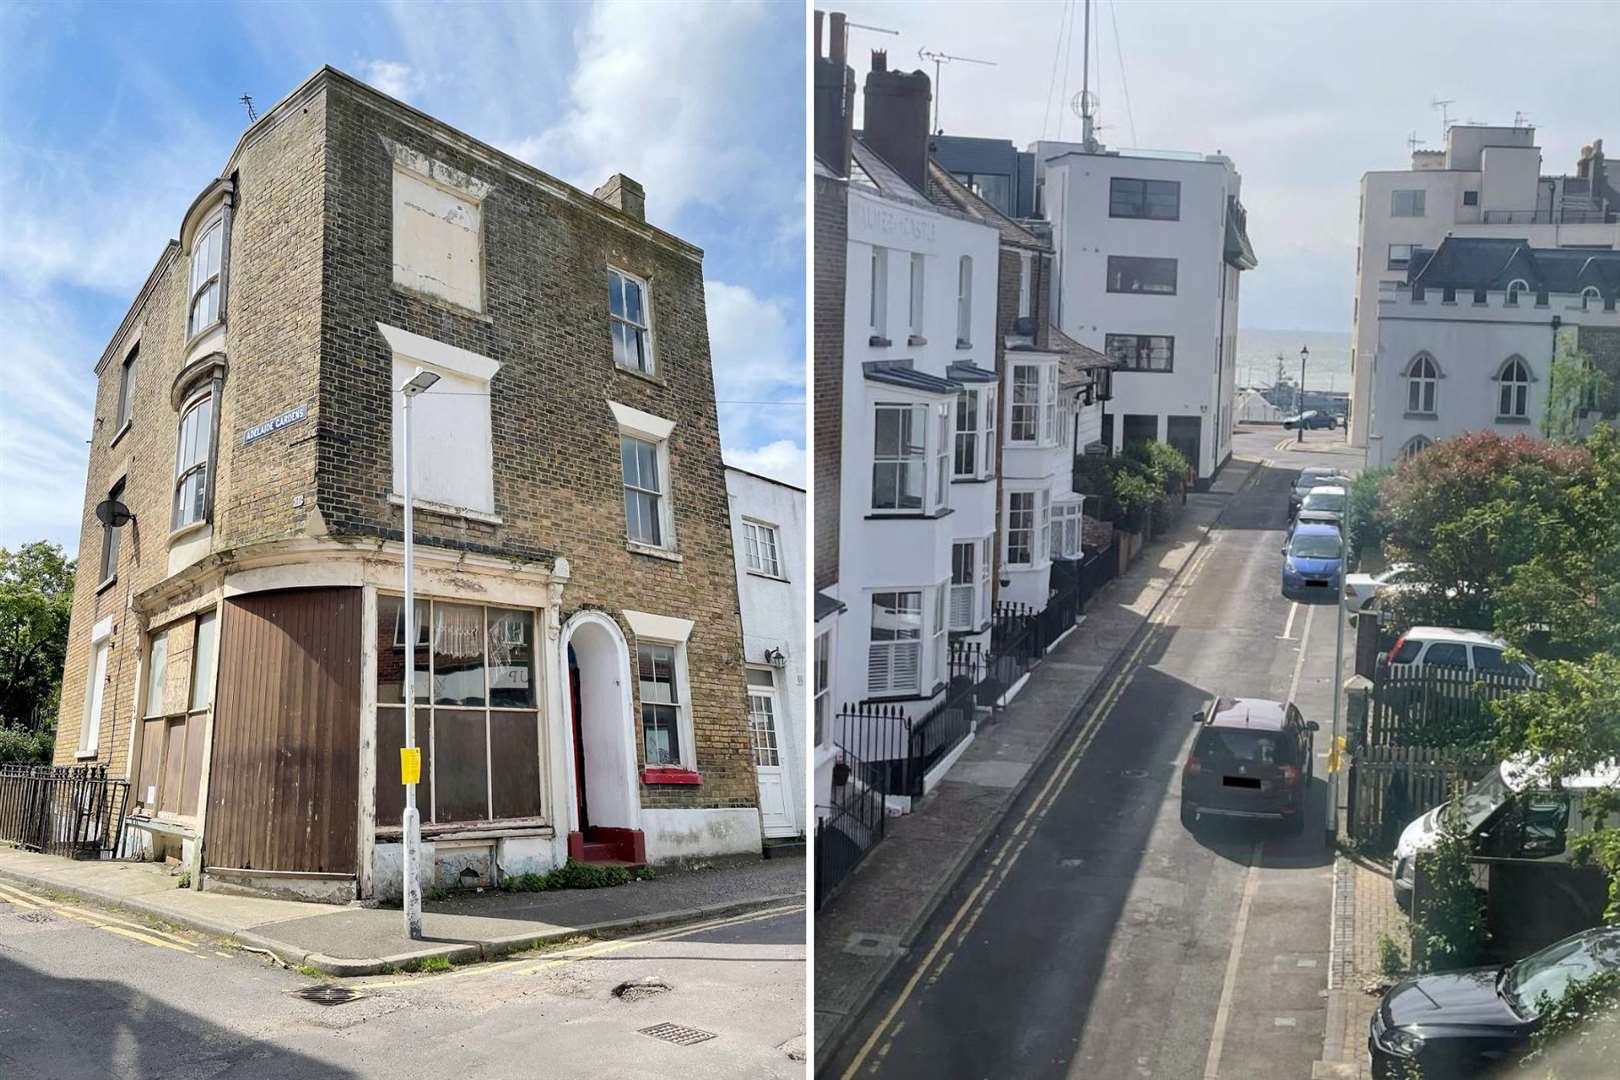 18 Albert Street in Ramsgate has been auctioned for £ 110-120,000 and has sea views. Photo: Clive Emson